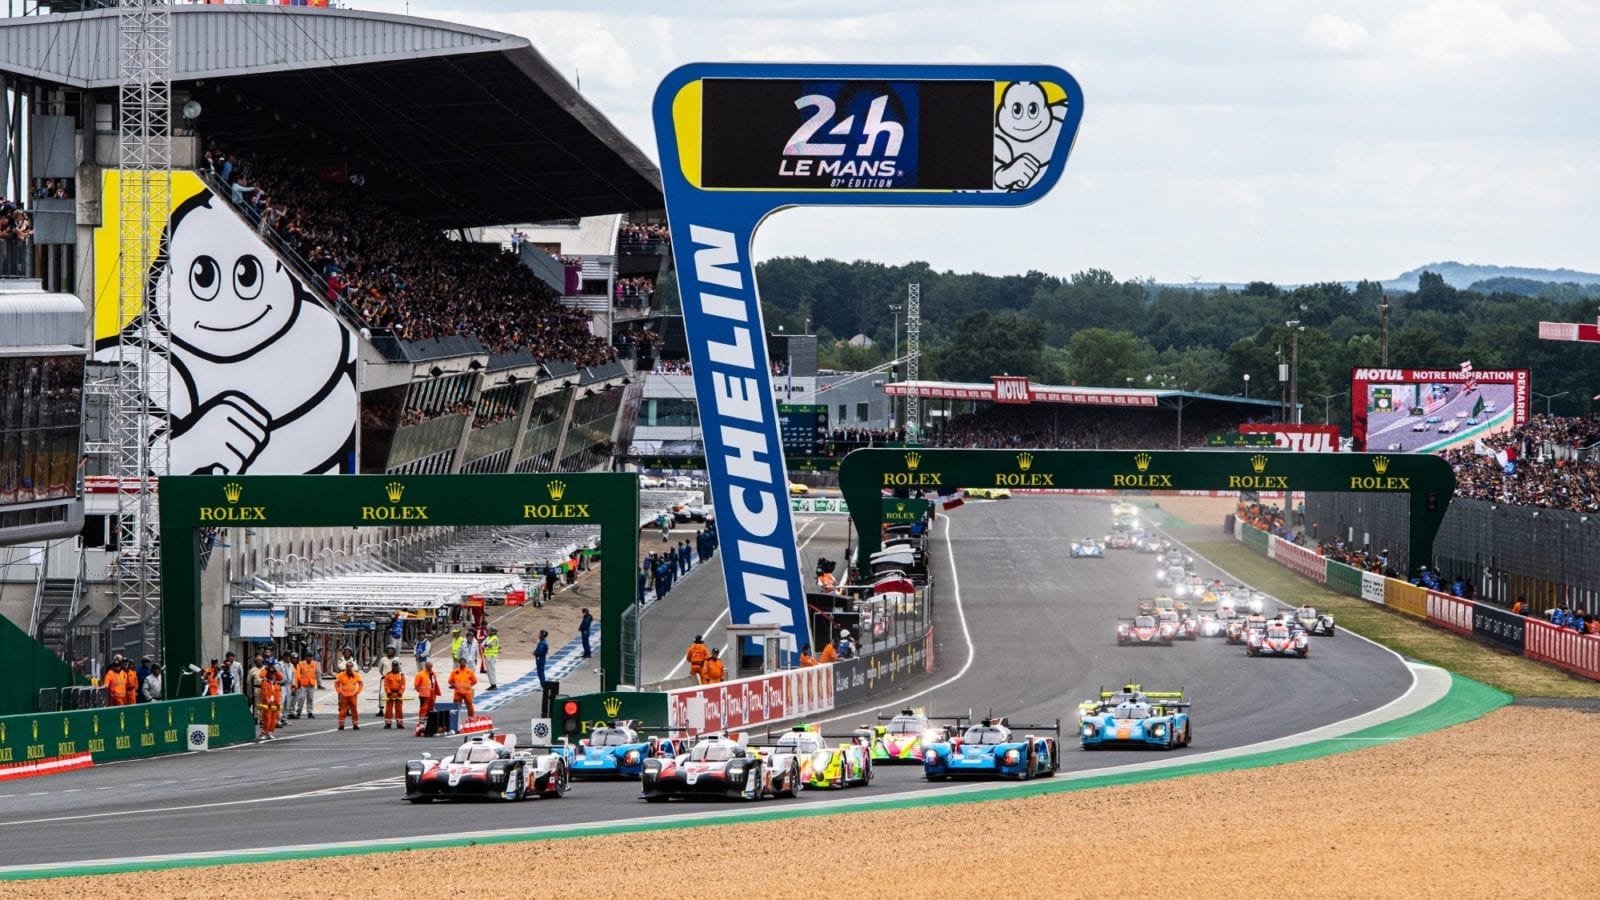 Start of 2019 Le Mans 24 Hours